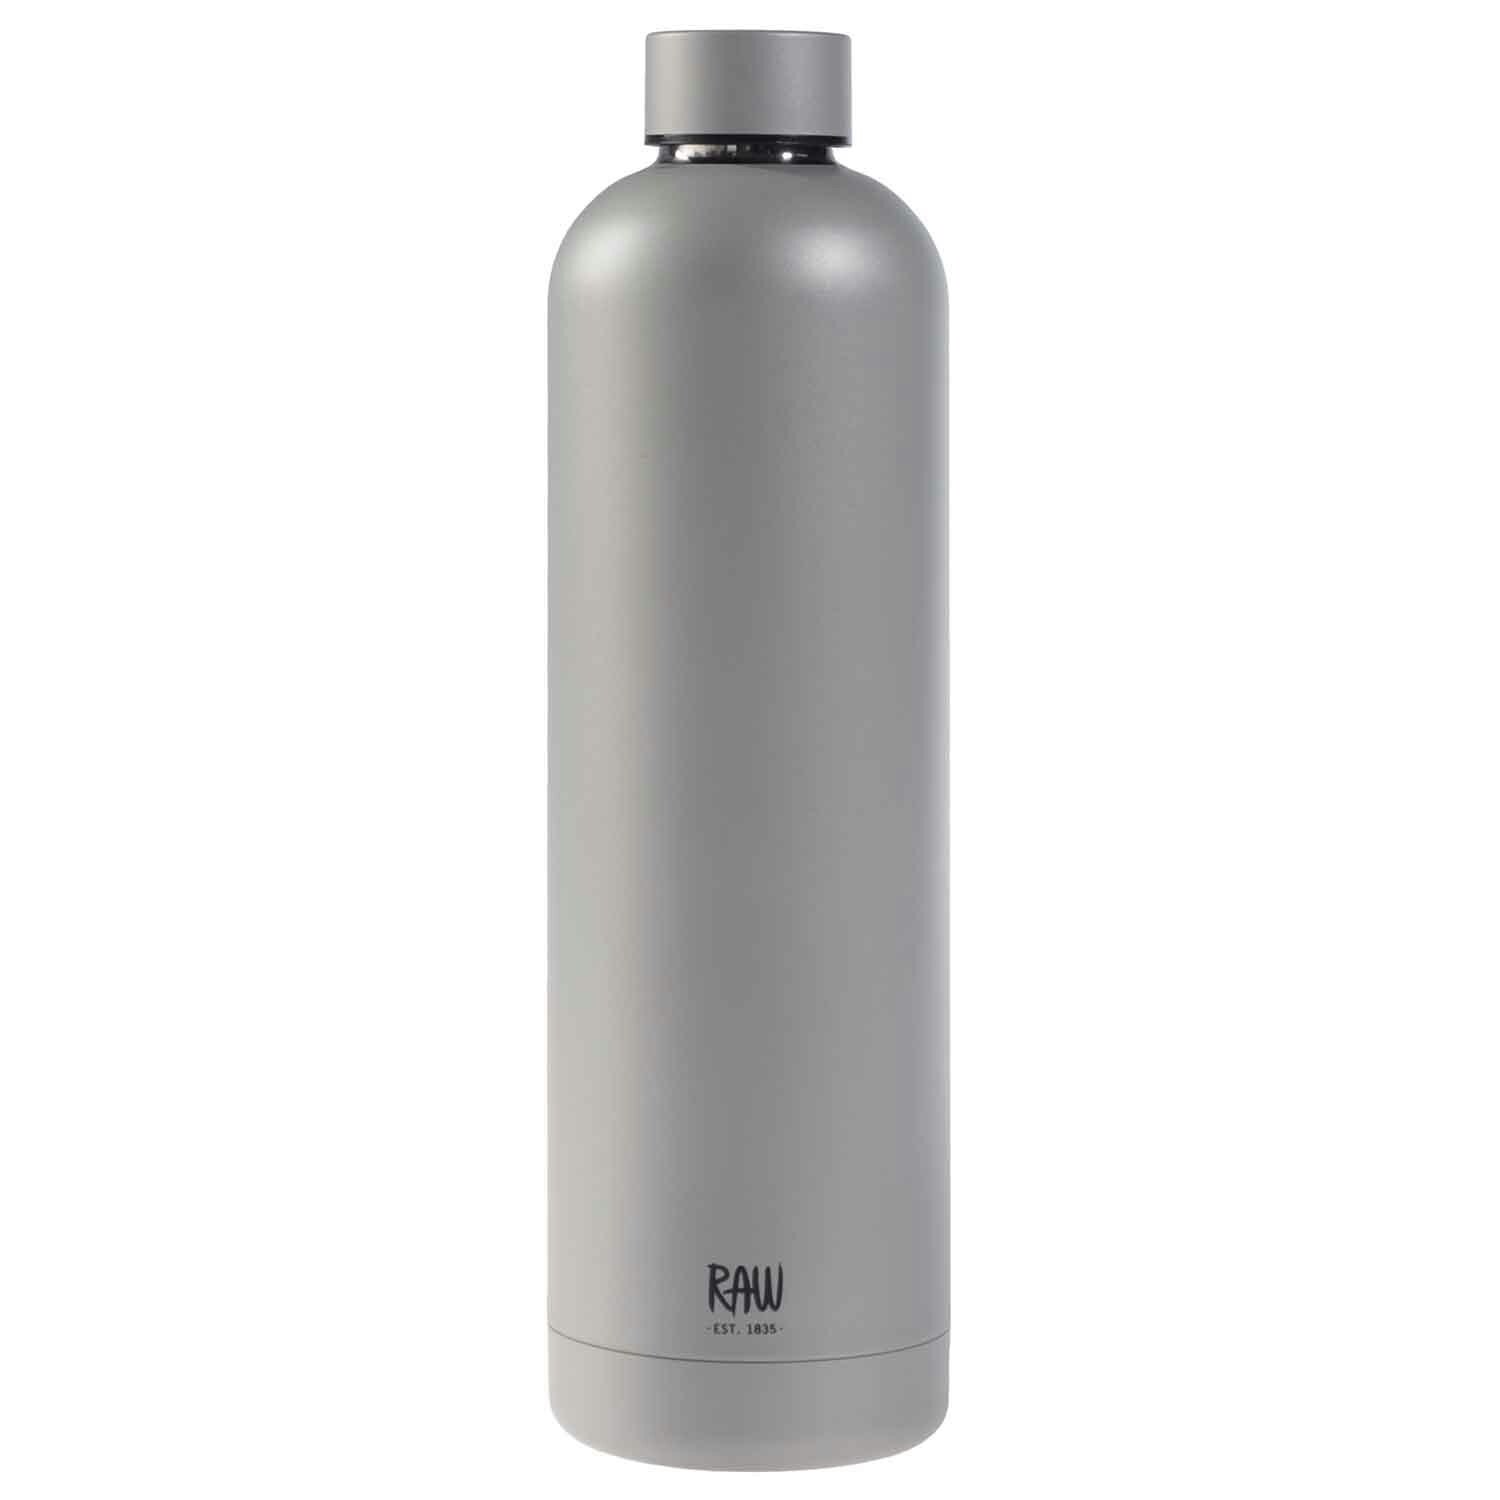 black thermo flask